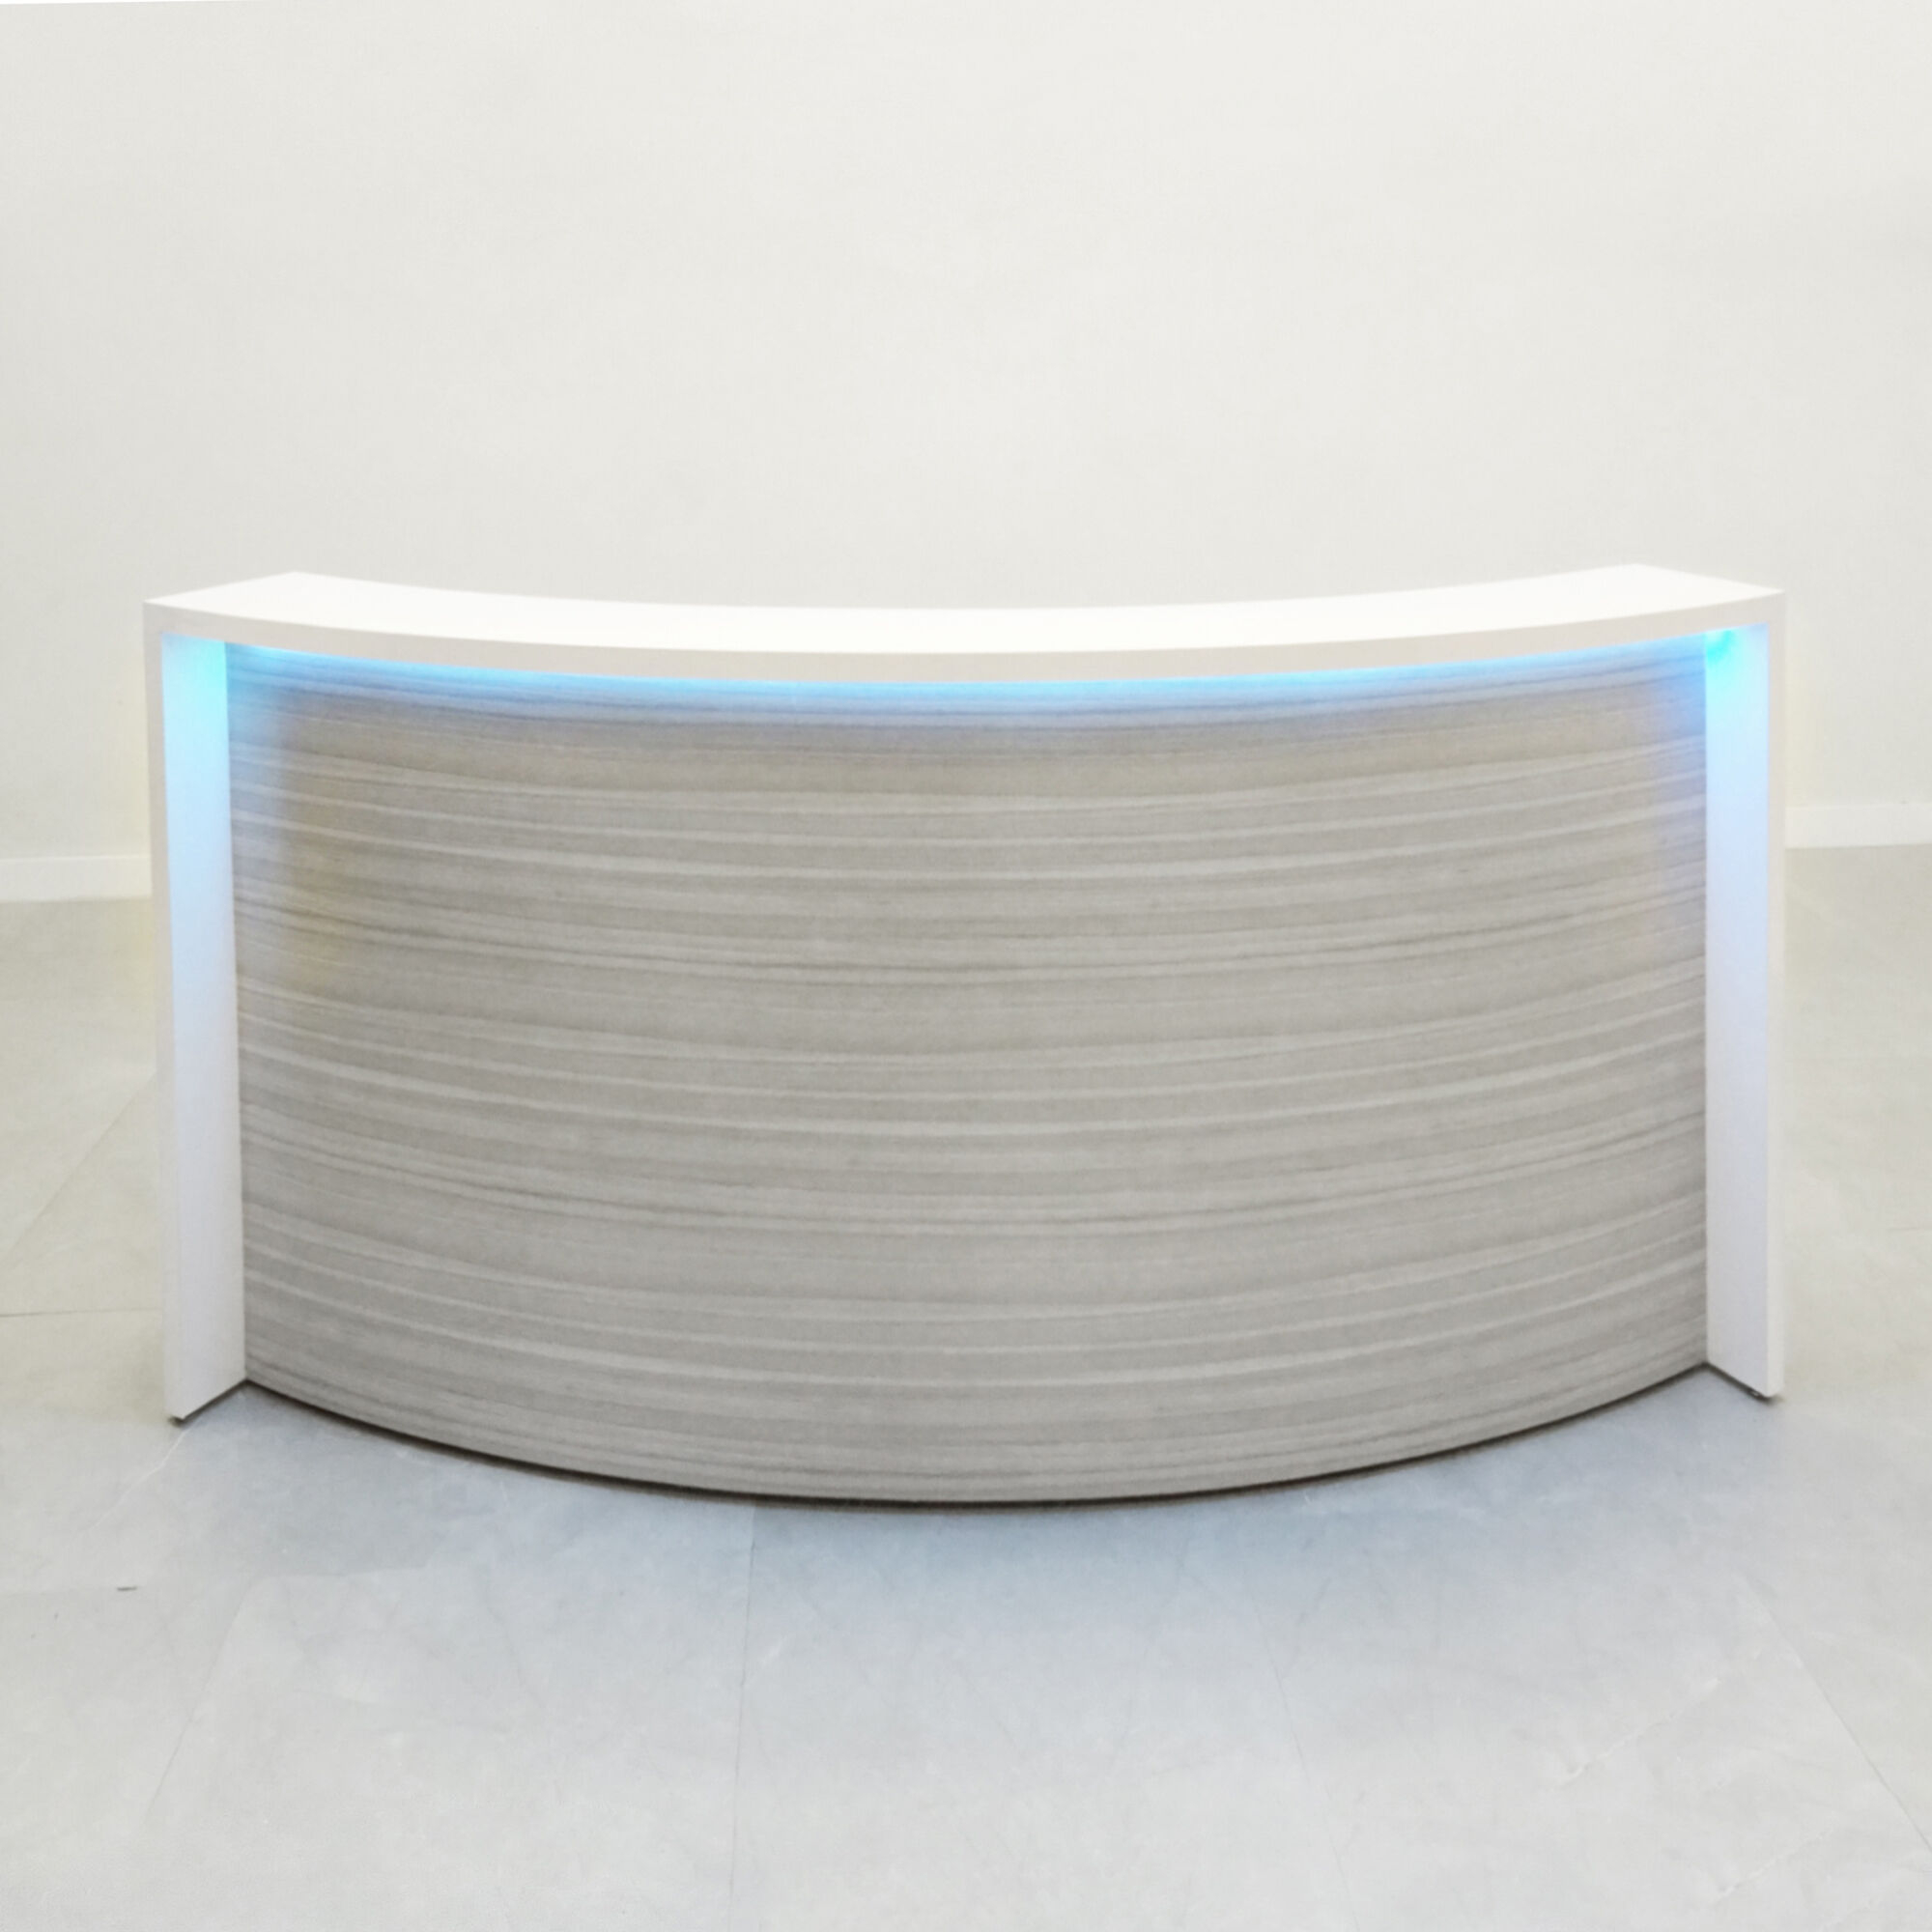 84-inch Seattle X1 Custom Reception Desk in white matte laminate desk, and special laminate curved front panel, with multi-colored LED, shown here.